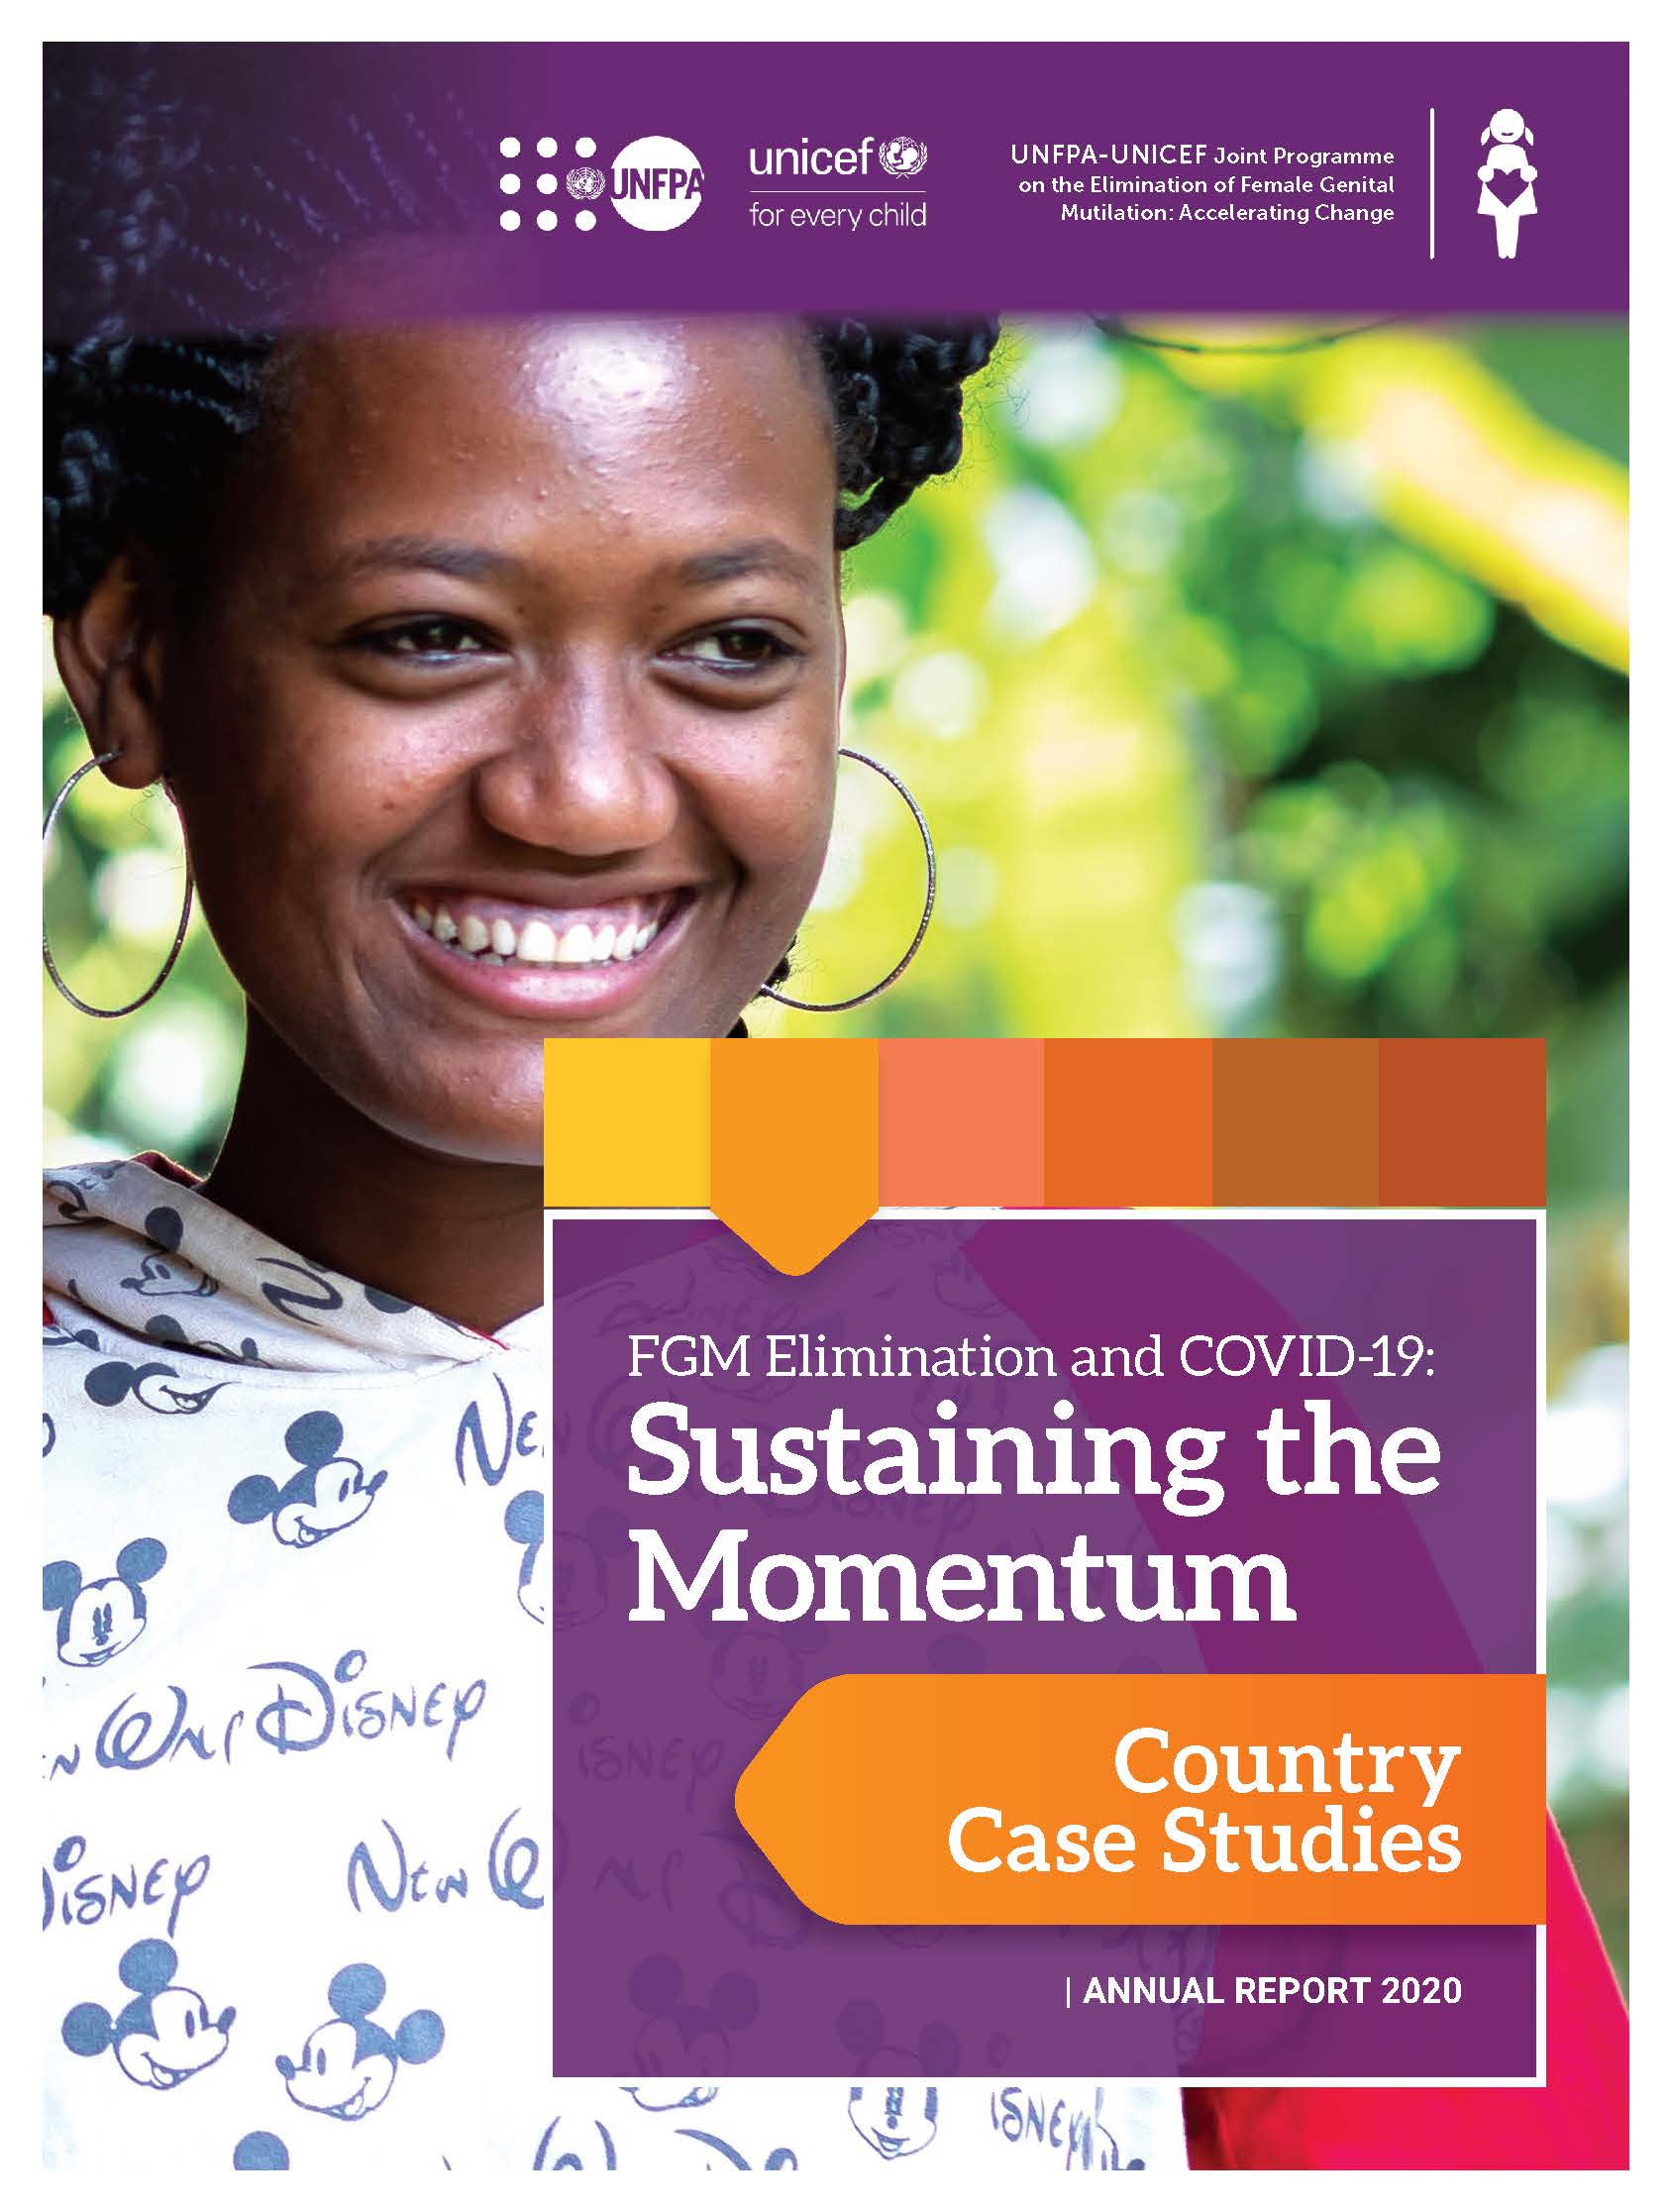 2020 Annual Report on FGM: Country Case Studies - Progress in the Elimination of Female Genital Mutilation